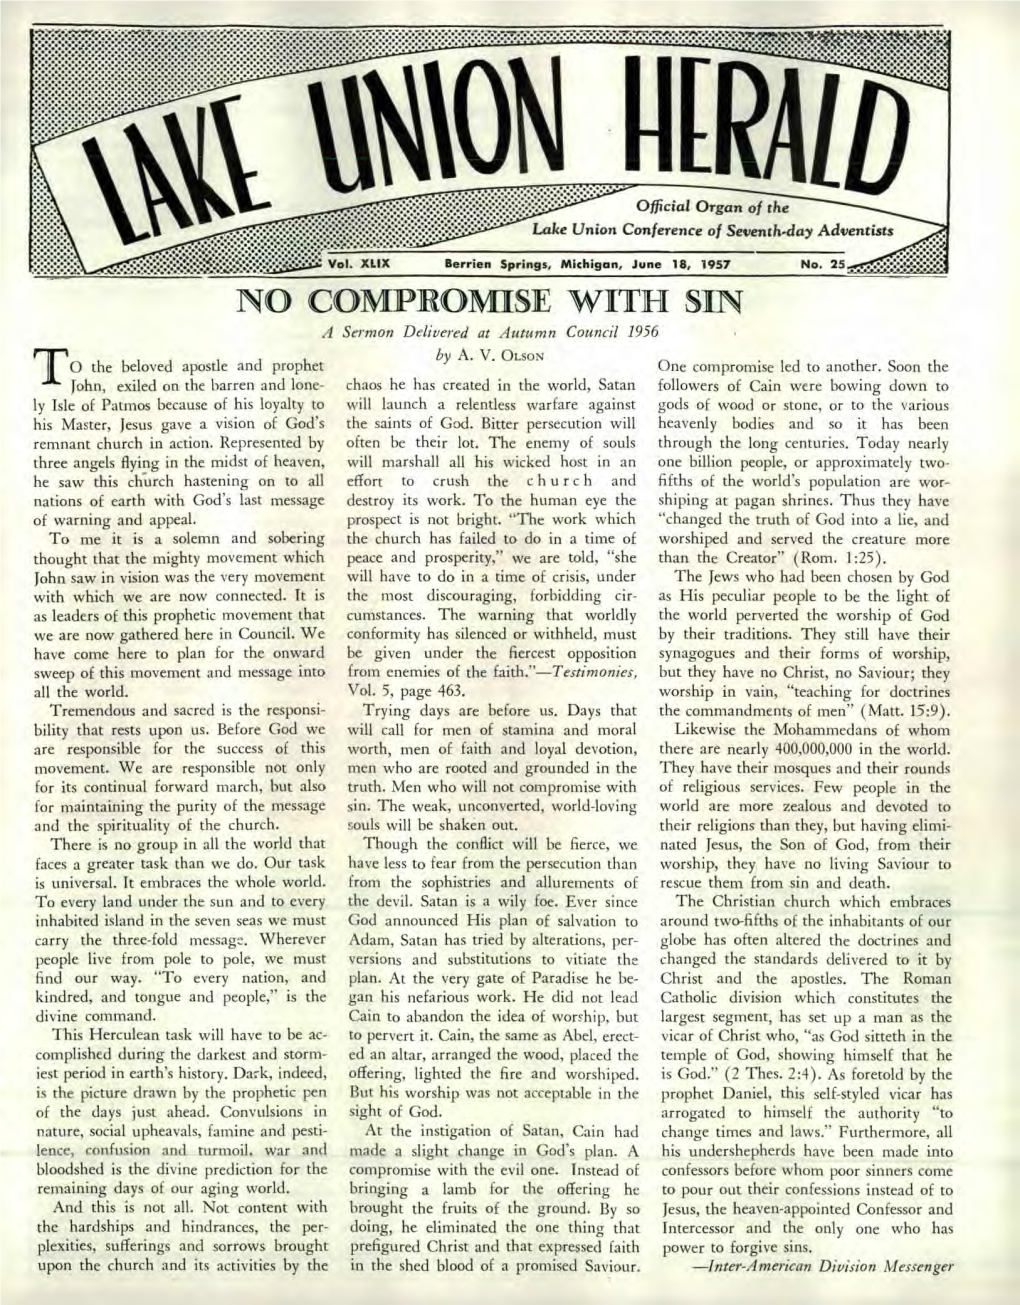 NO COMPROMISE with SIN a Sermon Delivered at Autumn Council 1956 by A